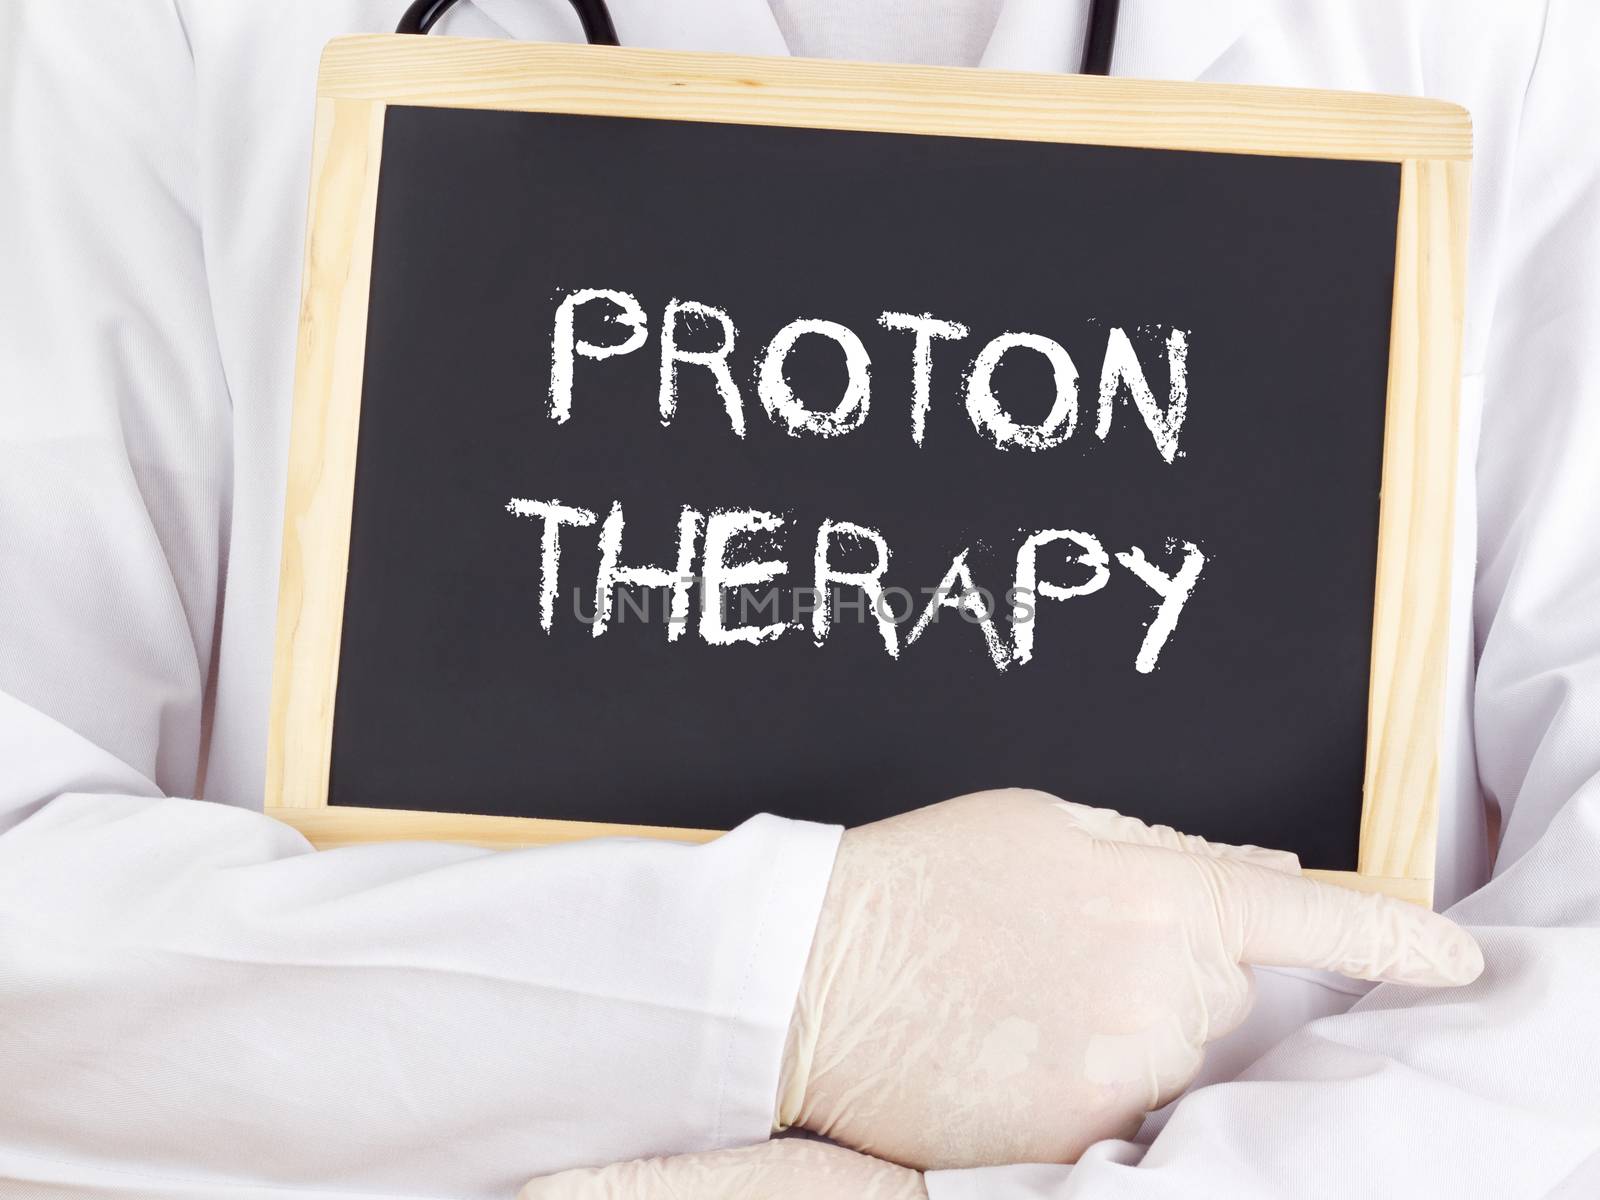 Doctor shows information: proton therapy by gwolters